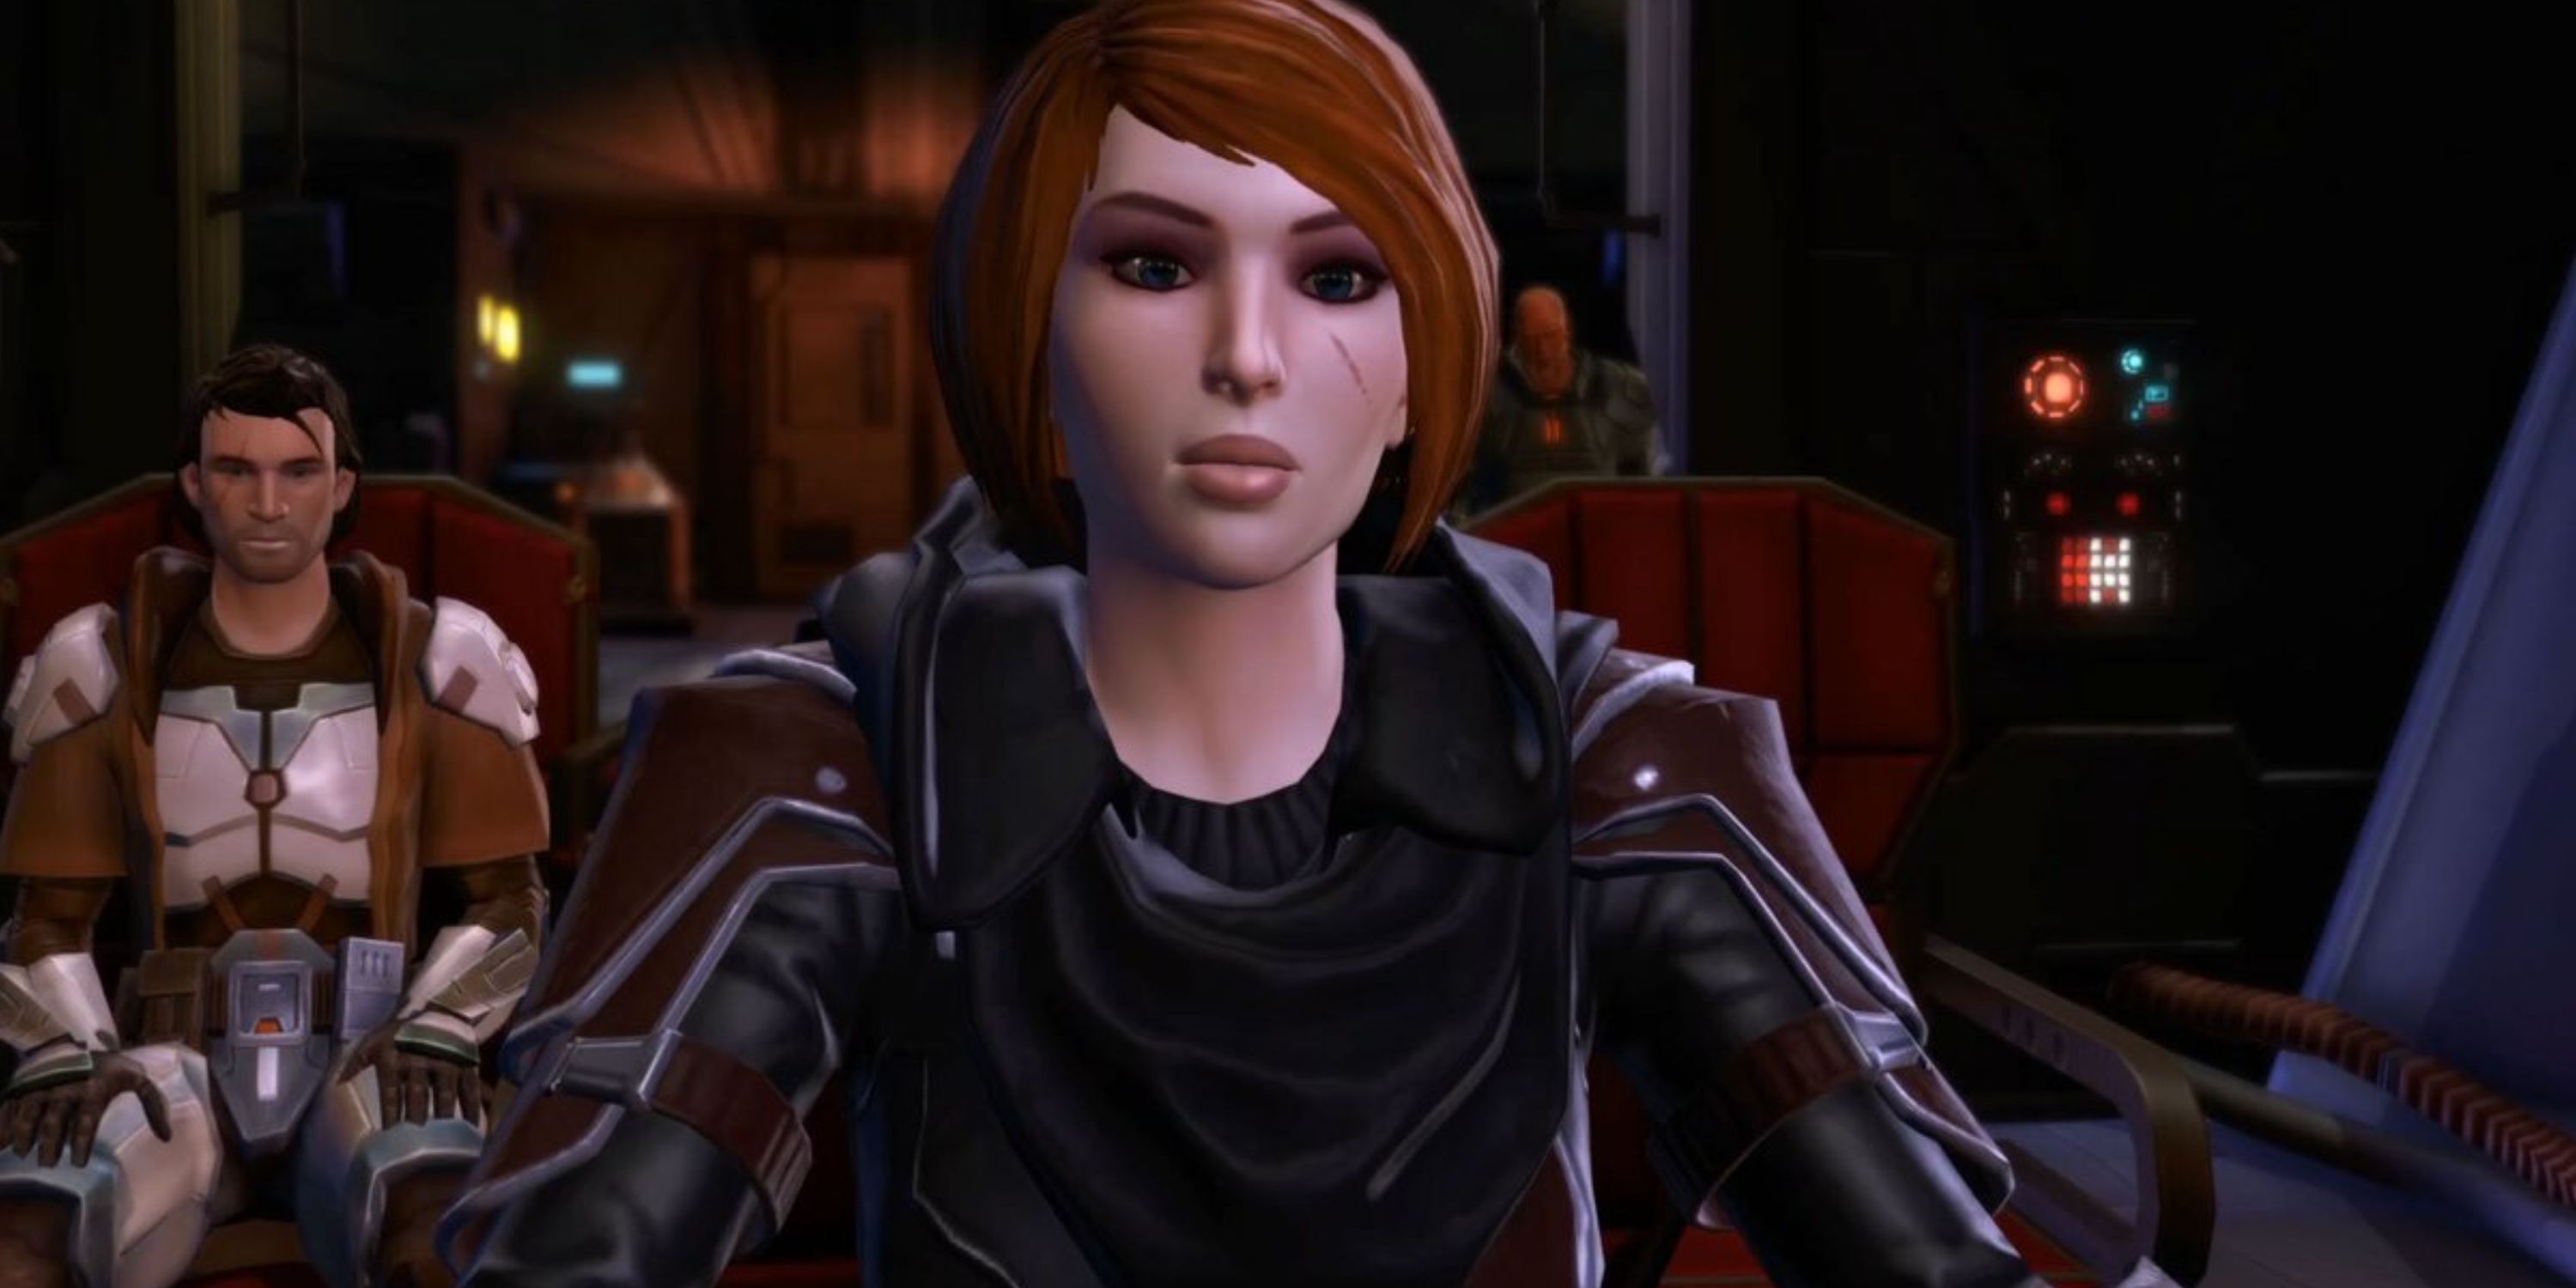 Kira, a companion from Star Wars: The Old Republic